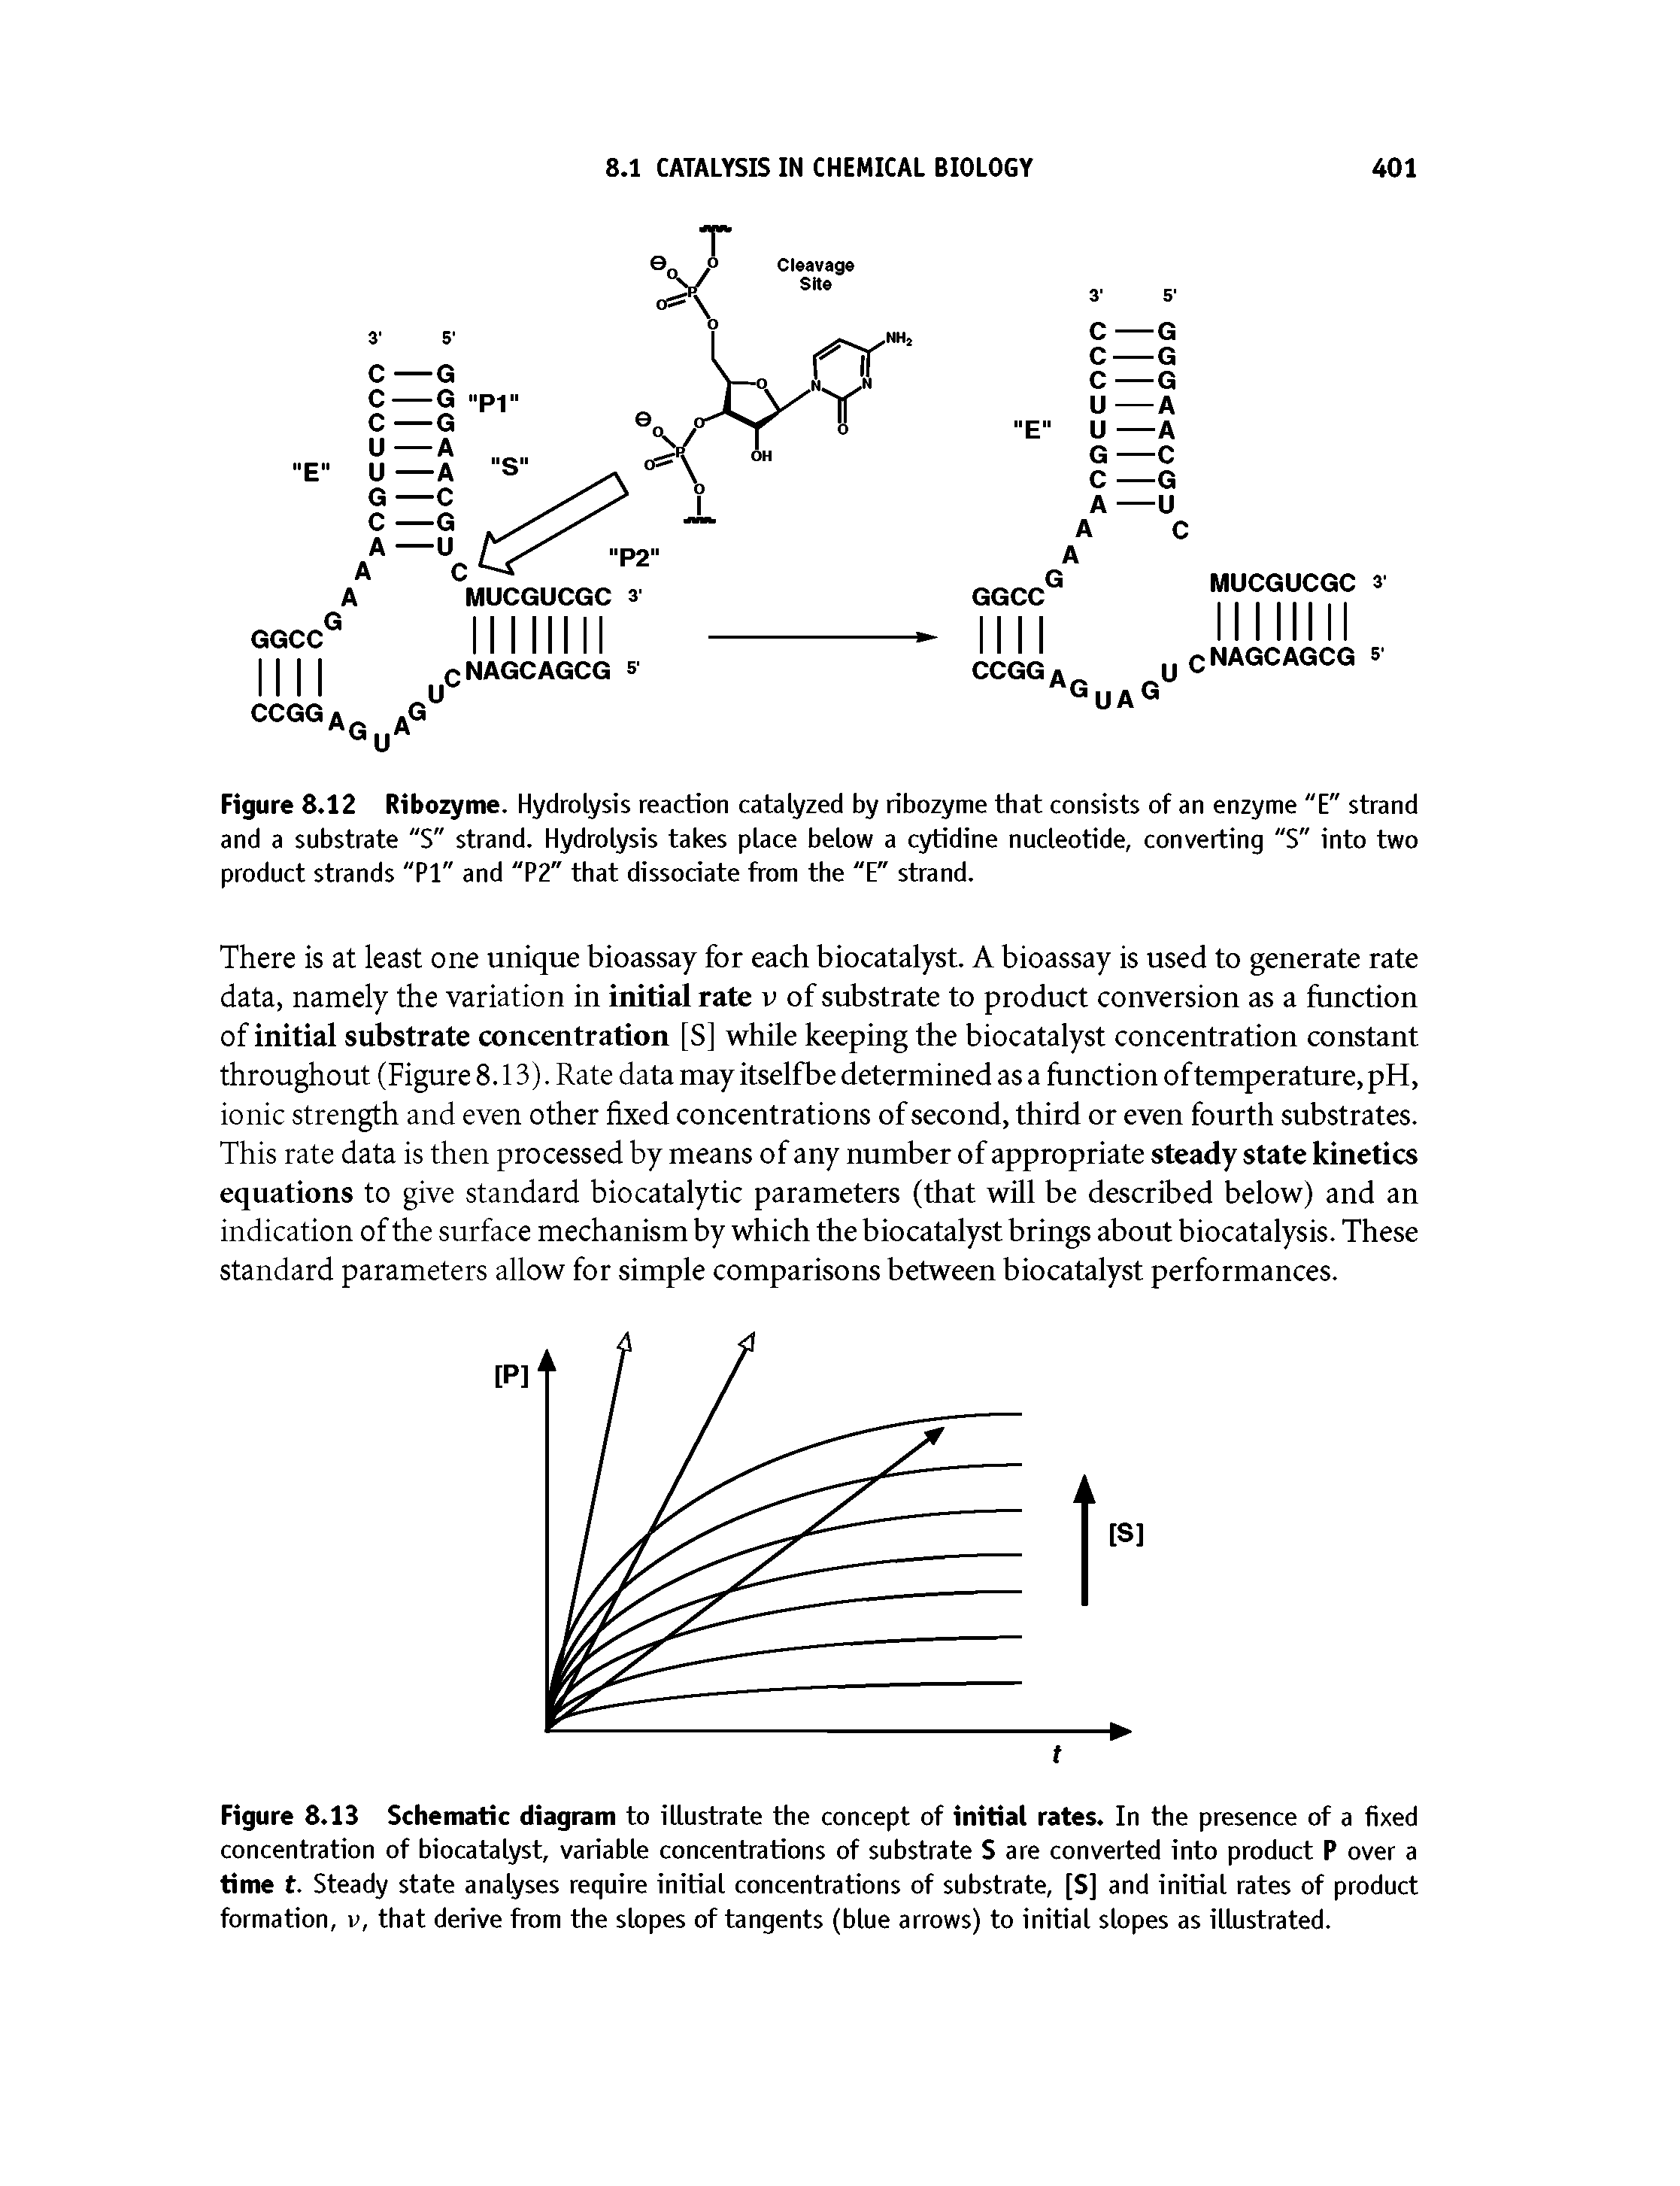 Figure 8.13 Schematic diagram to illustrate the concept of initial rates. In the presence of a fixed concentration of biocatalyst, variable concentrations of substrate S are converted into product P over a time t. Steady state analyses require initial concentrations of substrate, [S] and initial rates of product formation, v, that derive from the slopes of tangents (blue arrows) to initial slopes as illustrated.